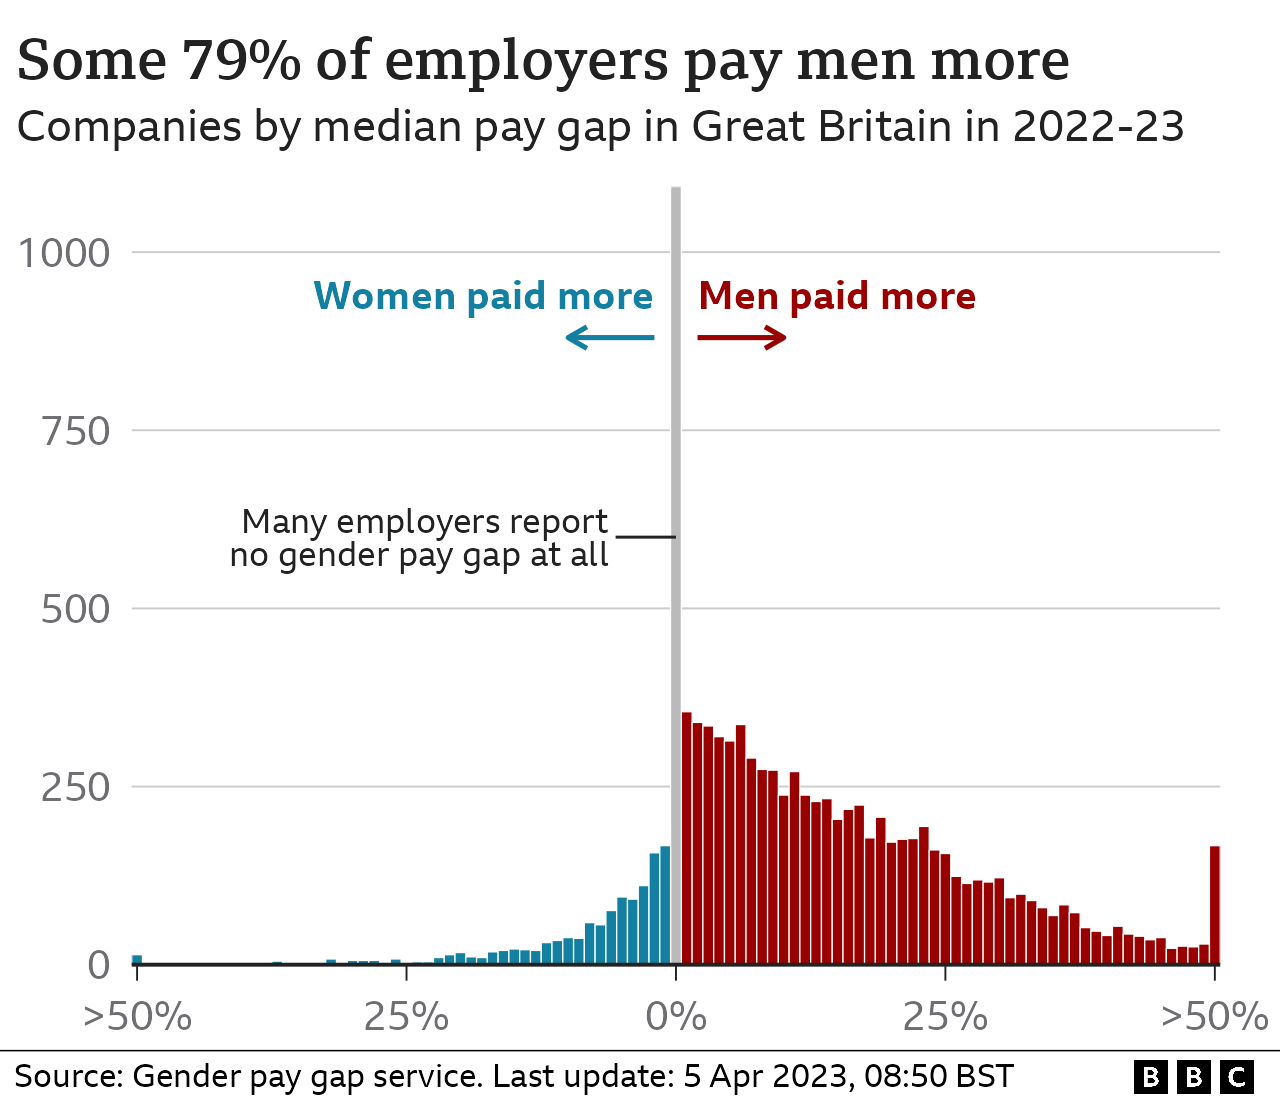 Histogram chart showing the distribution of companies based on their median gender pay gap. In 80% of those companies, men earned more than women.